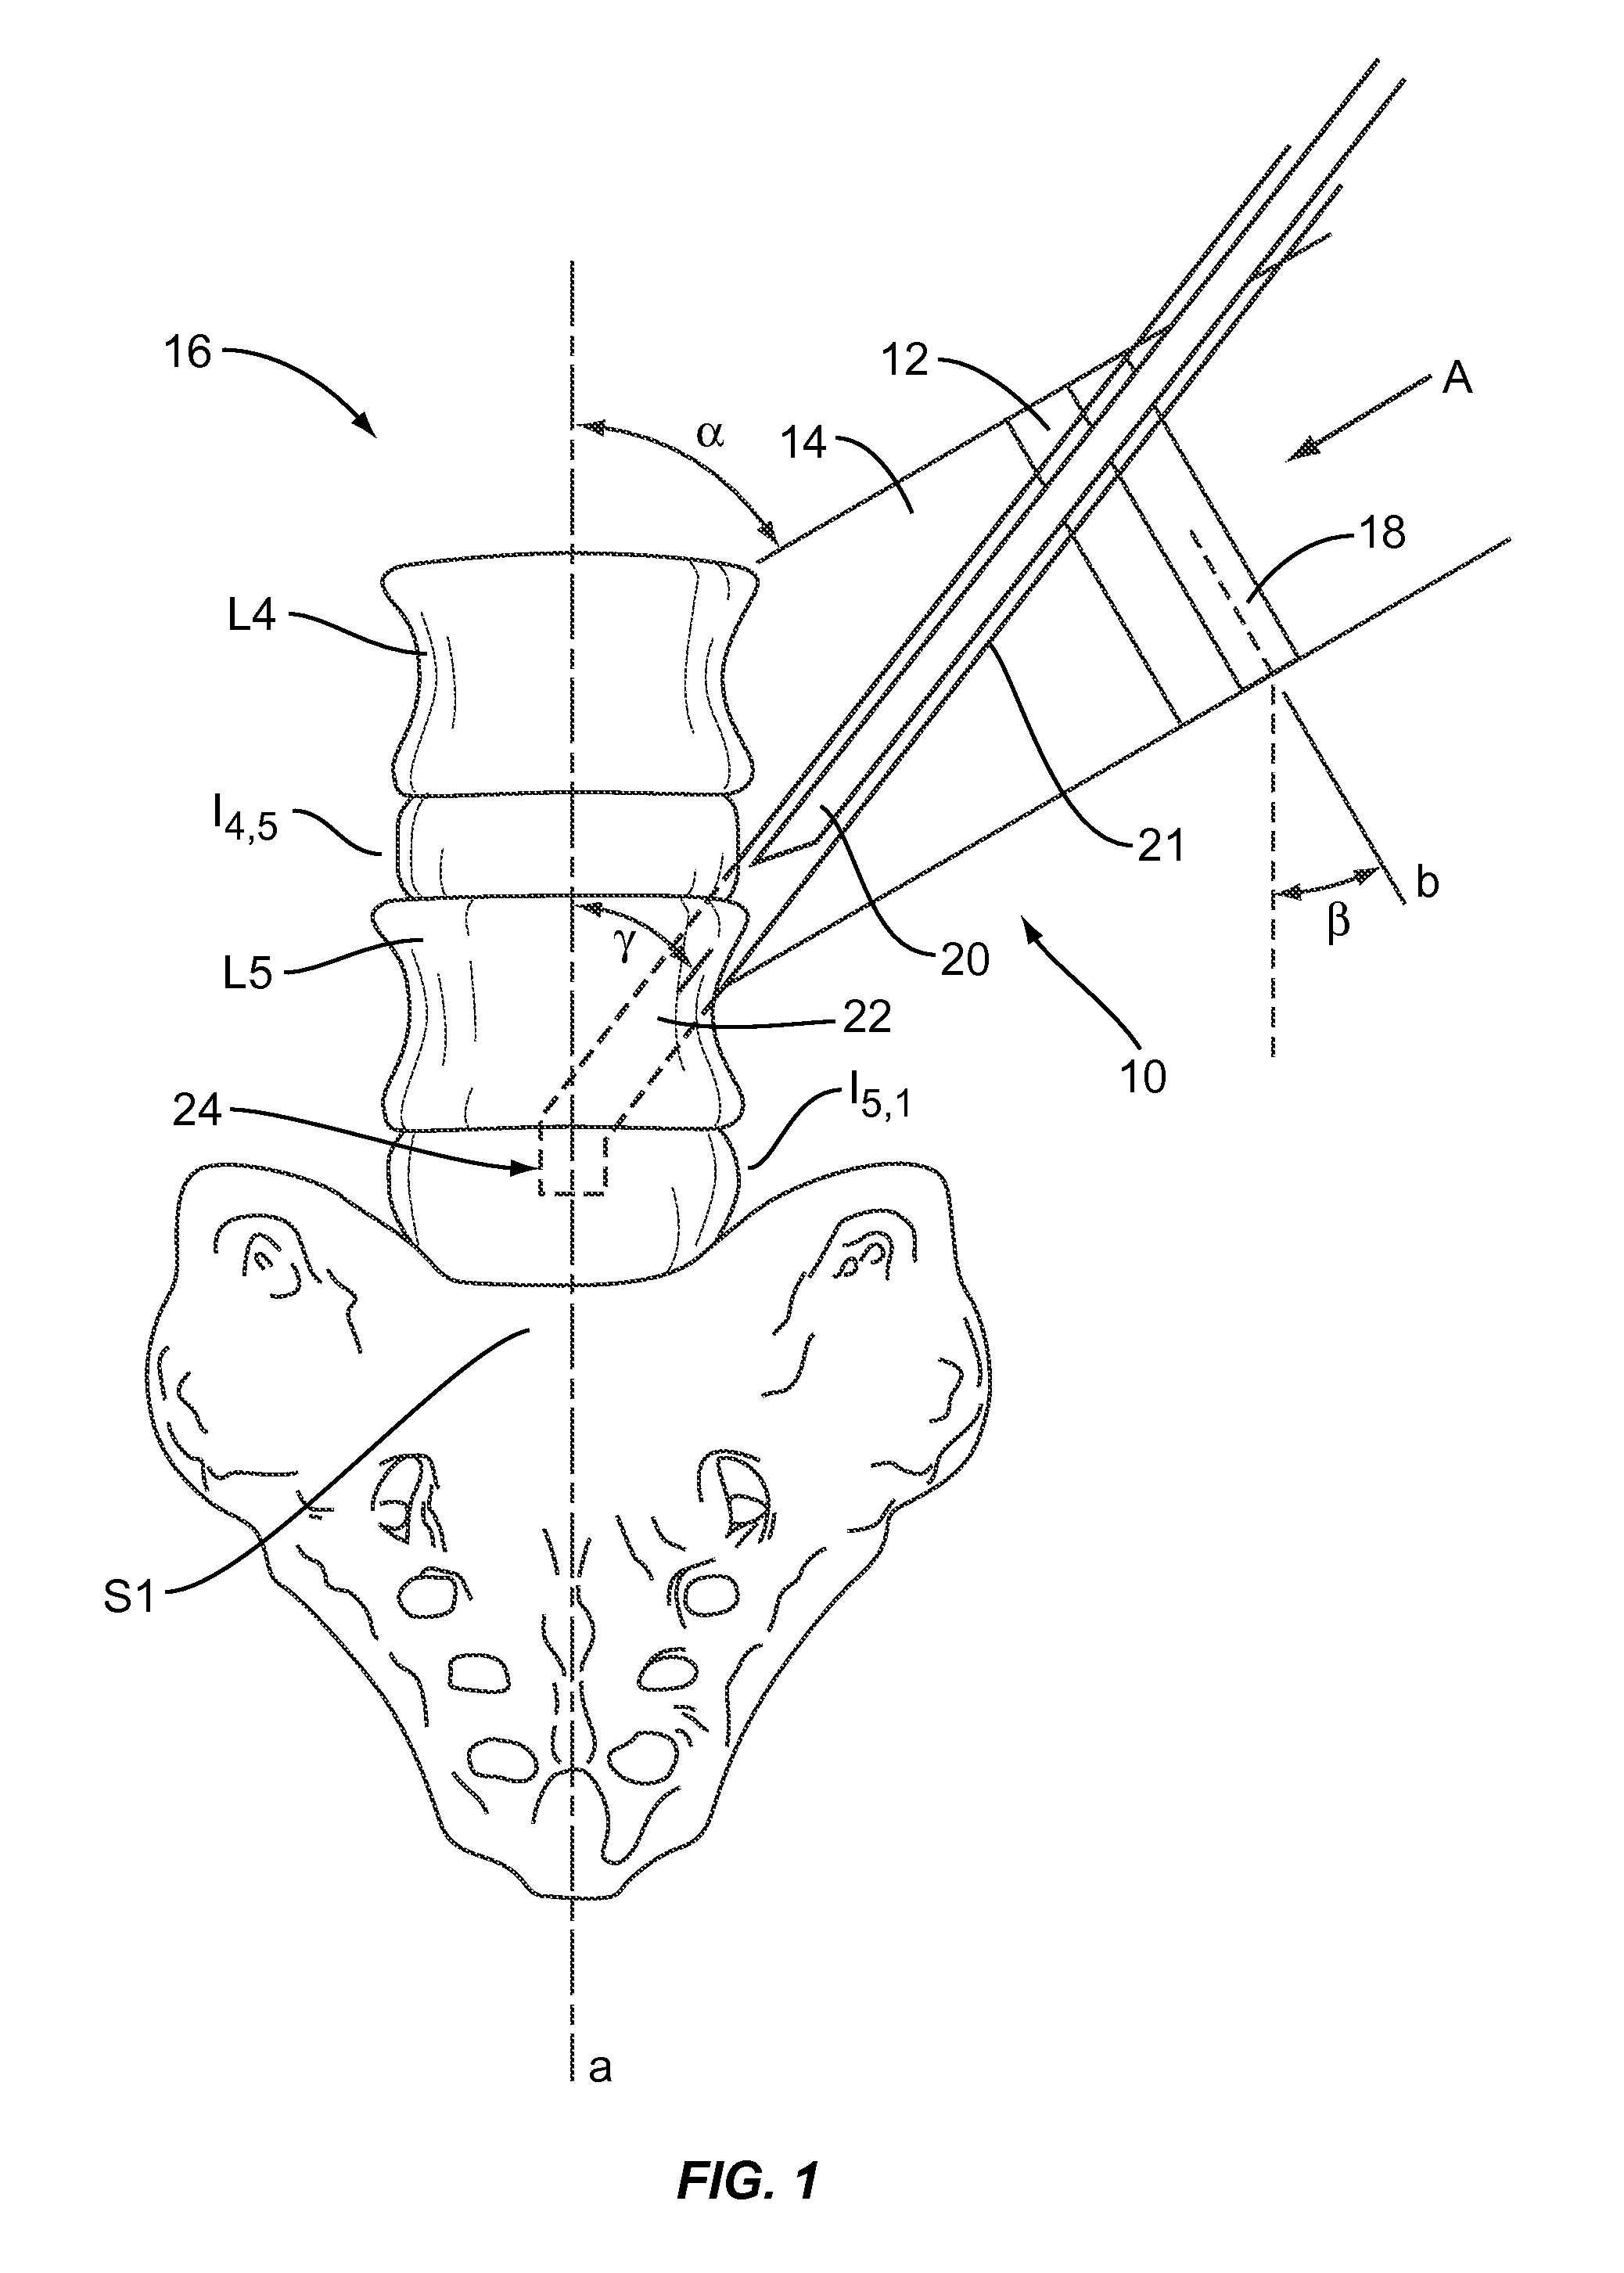 Lumbo-sacral implant system and method